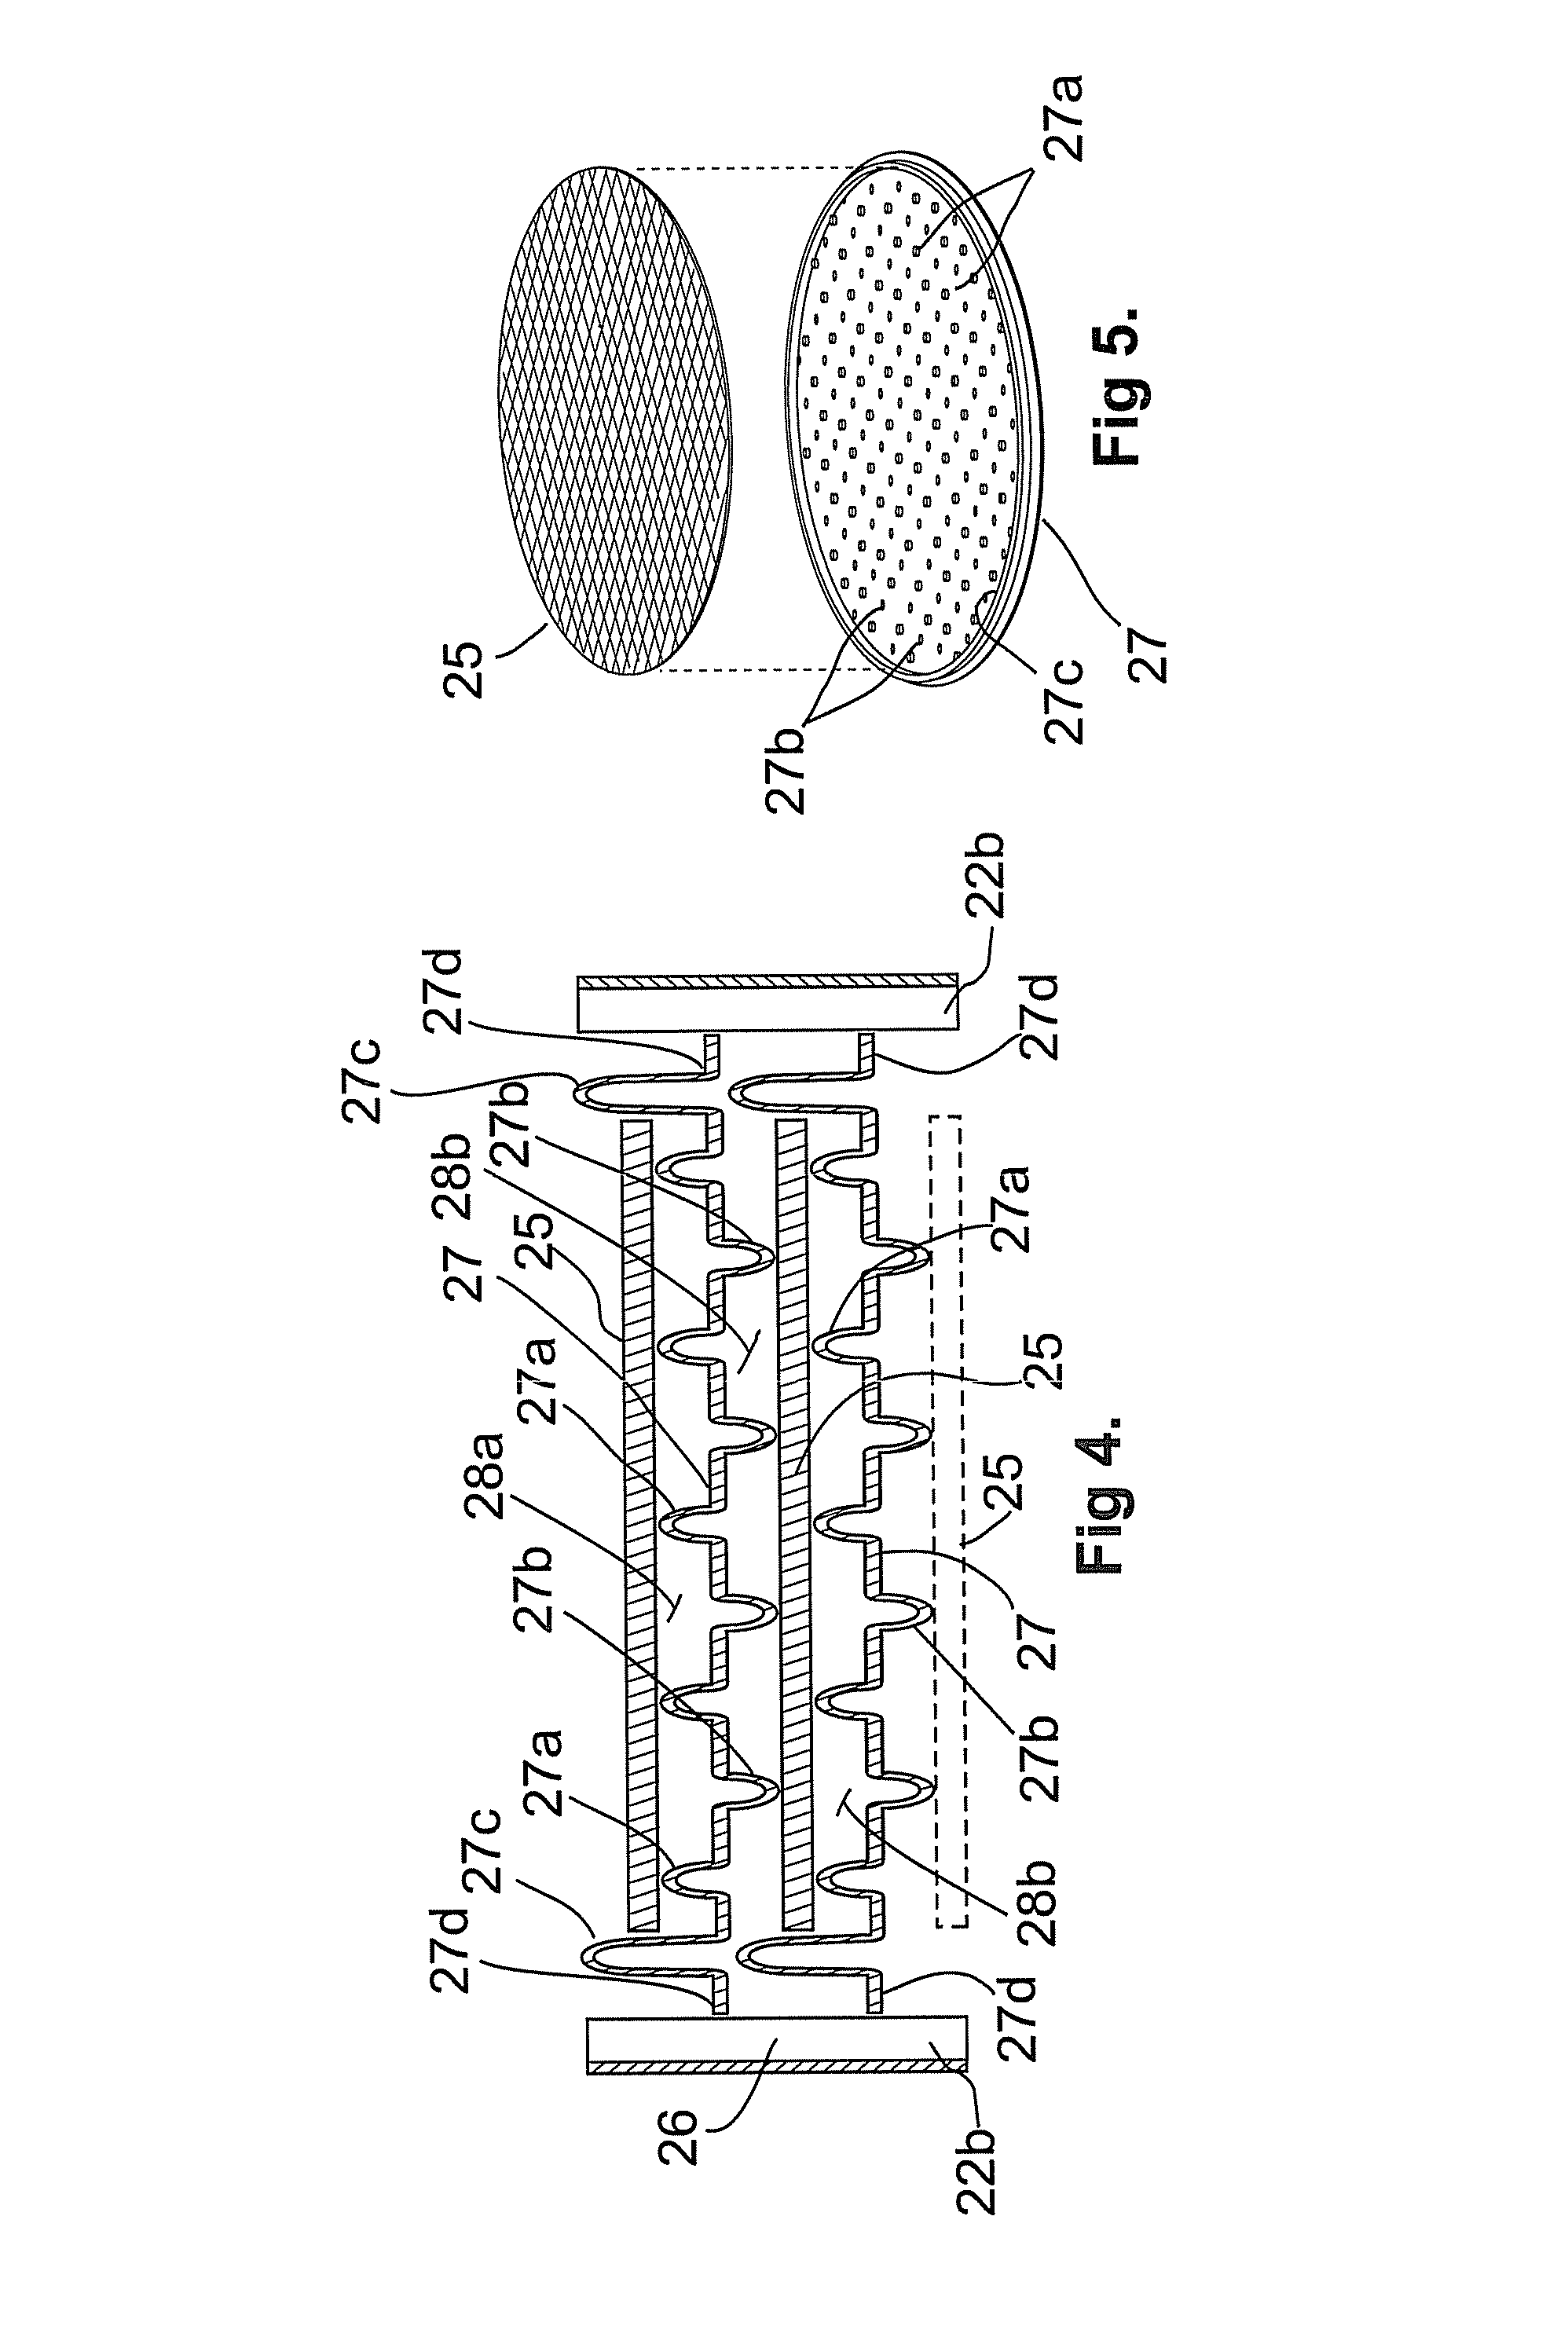 Packaging system for protection of IC wafers during fabrication, transport and storage